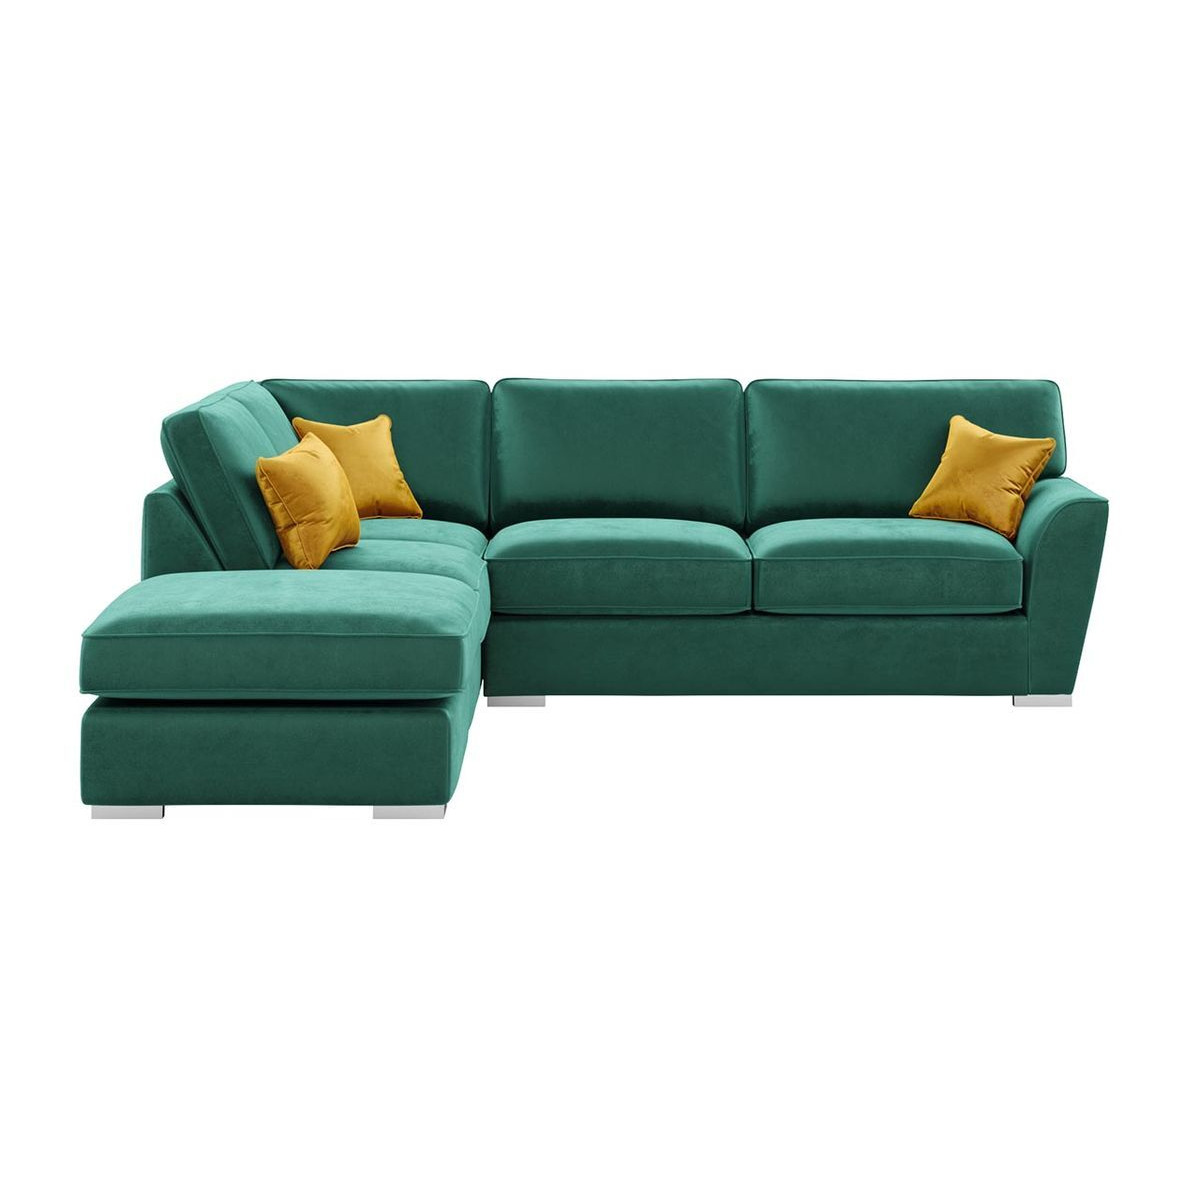 Majestic Left Hand Corner Sofa with Footstool and Fitted Back Cushions, dark green/mustard - image 1